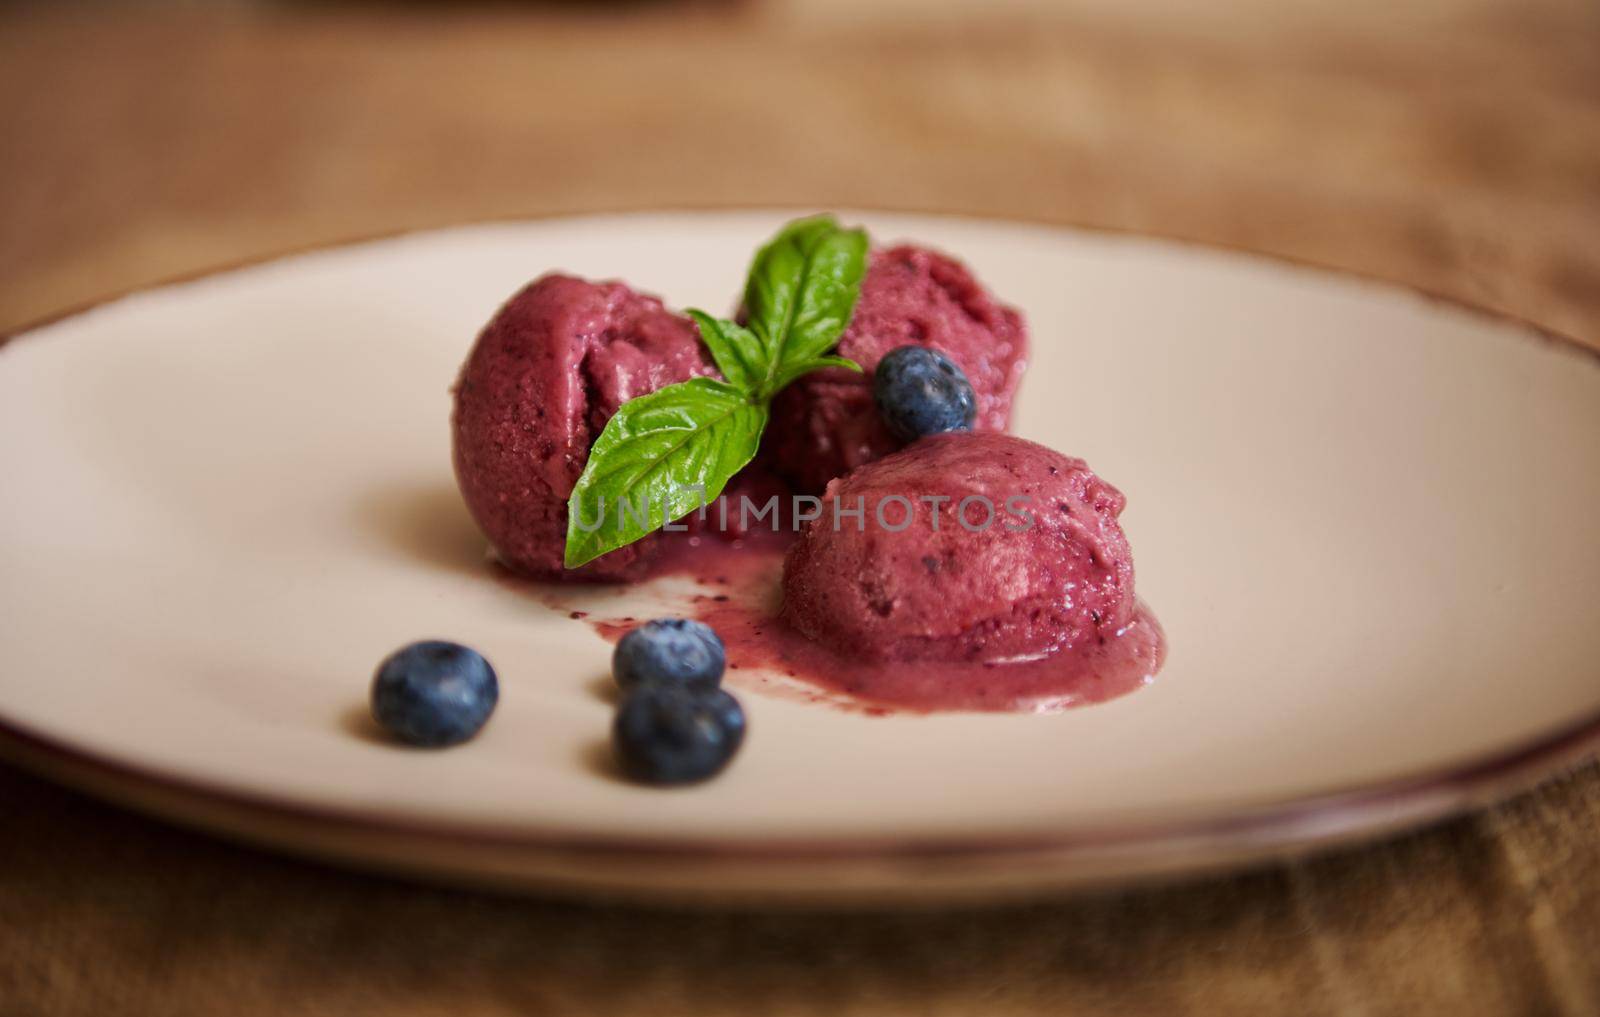 Blueberry sorbet purple ice-cream with lemon basil leaves. Raw vegan dairy free and gluten free dessert. Healthy Eating. Vegetarian food, natural dessert, home cooking. Still life. Food background